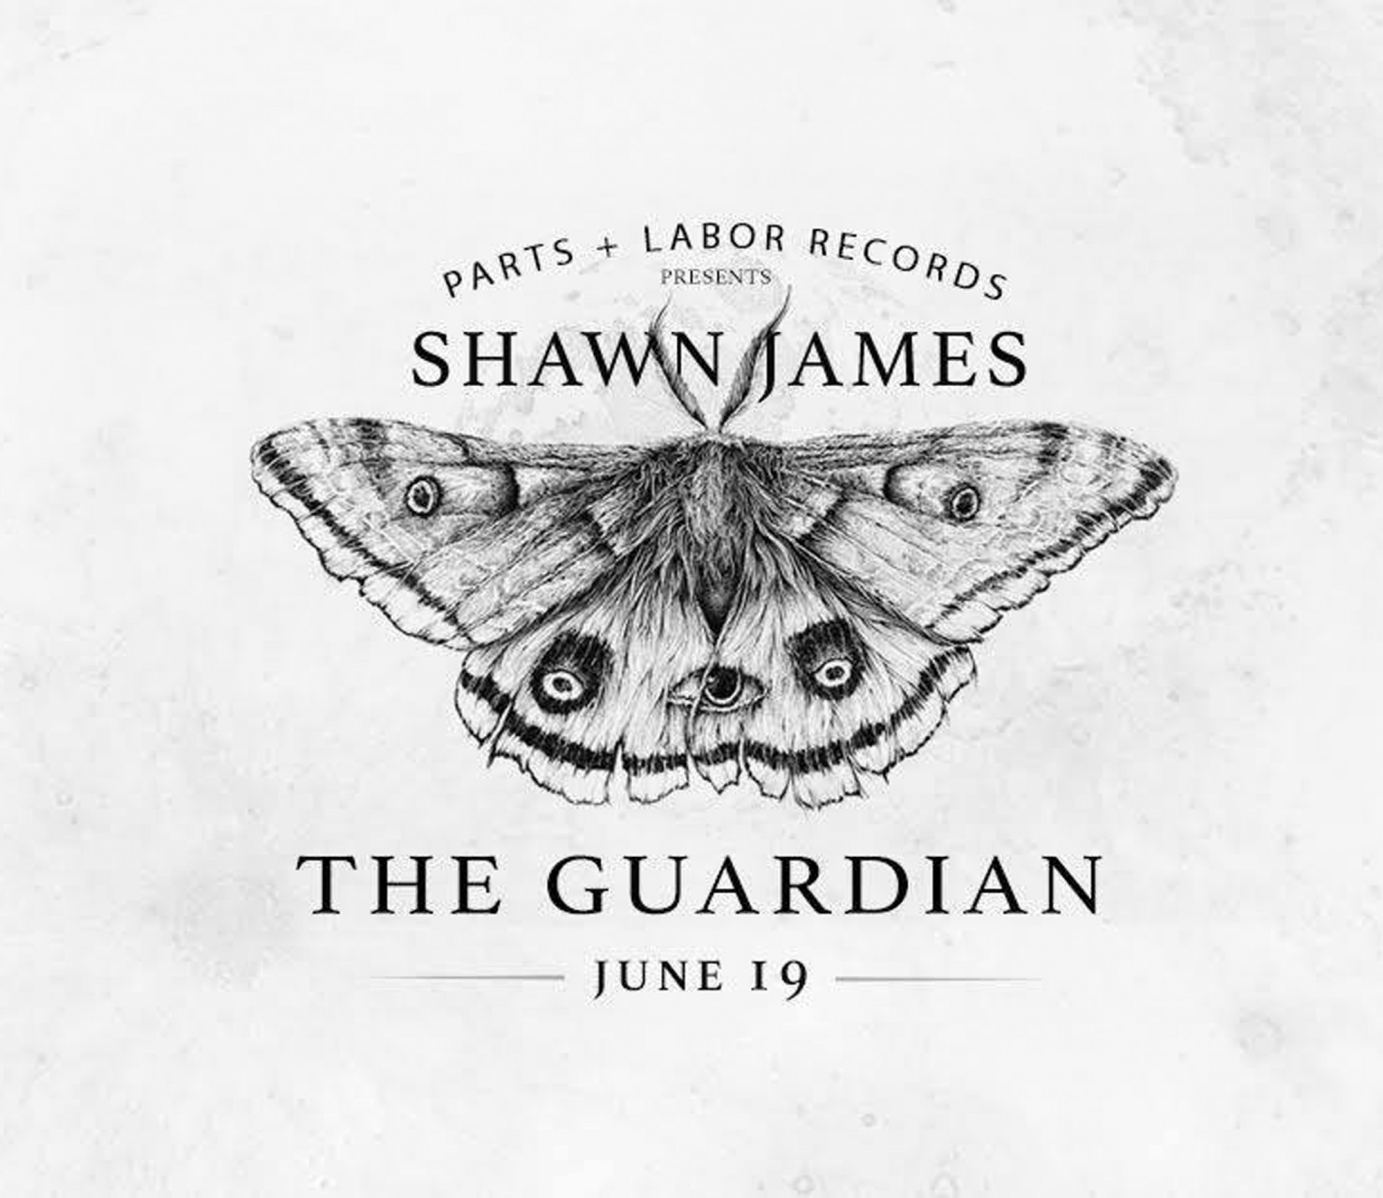 Shawn James single artwork for "Through The Valley" & "The Guardian" on the soundtrack for The Last of Us Part II PlayStation game